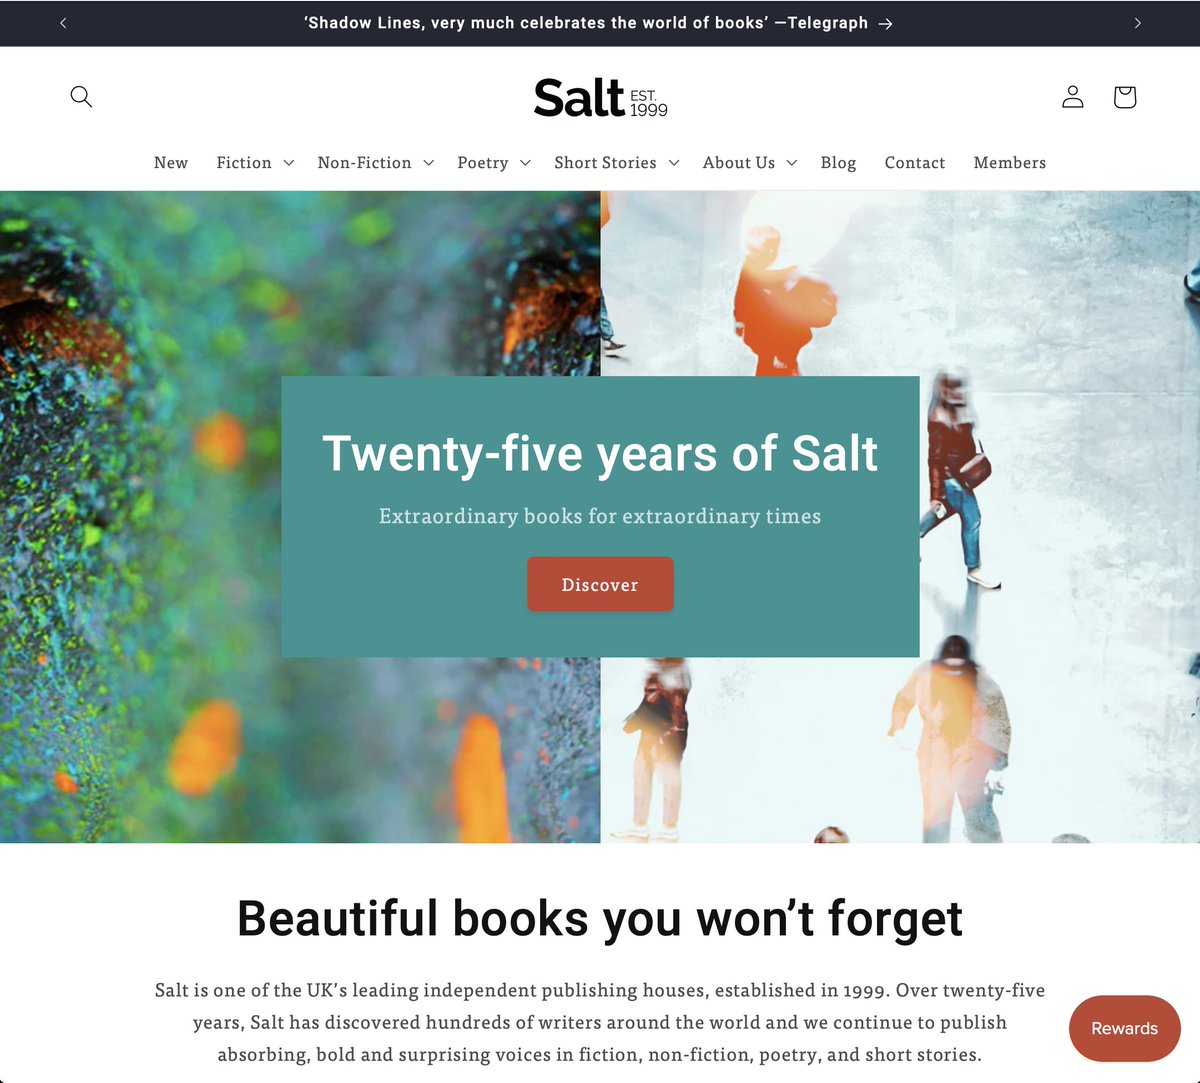 Come and join us as we launch our new website – celebrating twenty-five years in independent publishing. Discover this year’s amazing books and learn more about our work. Salt is commencing a new phase of development – subscribe now to discover more. Please RT – sincere thanks.